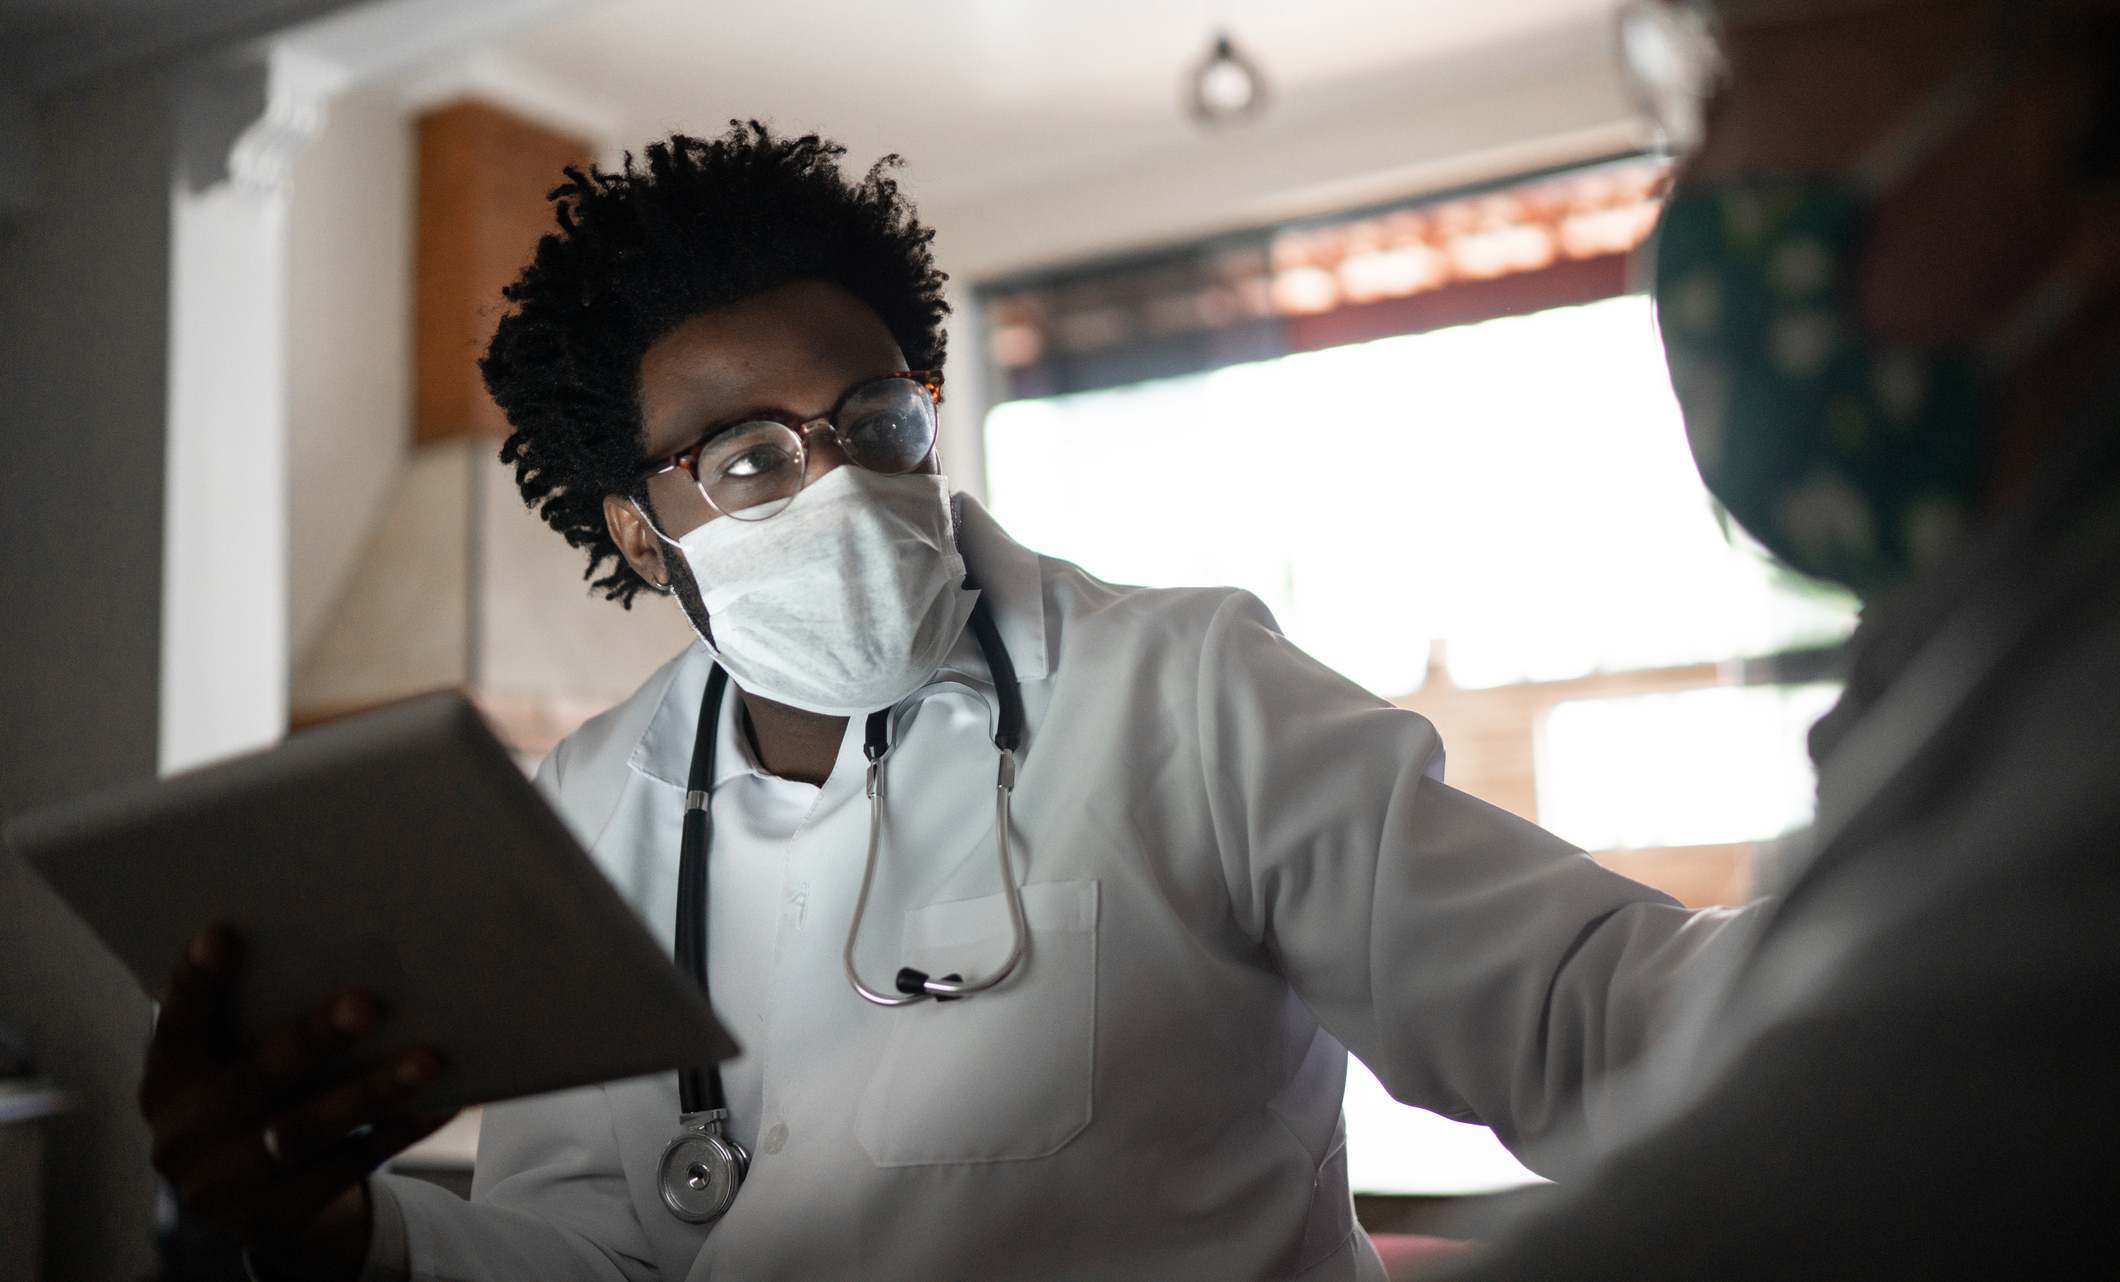 A younger physician assistant wearing glasses, white coat and stethoscope, examines patient while holding digital pad